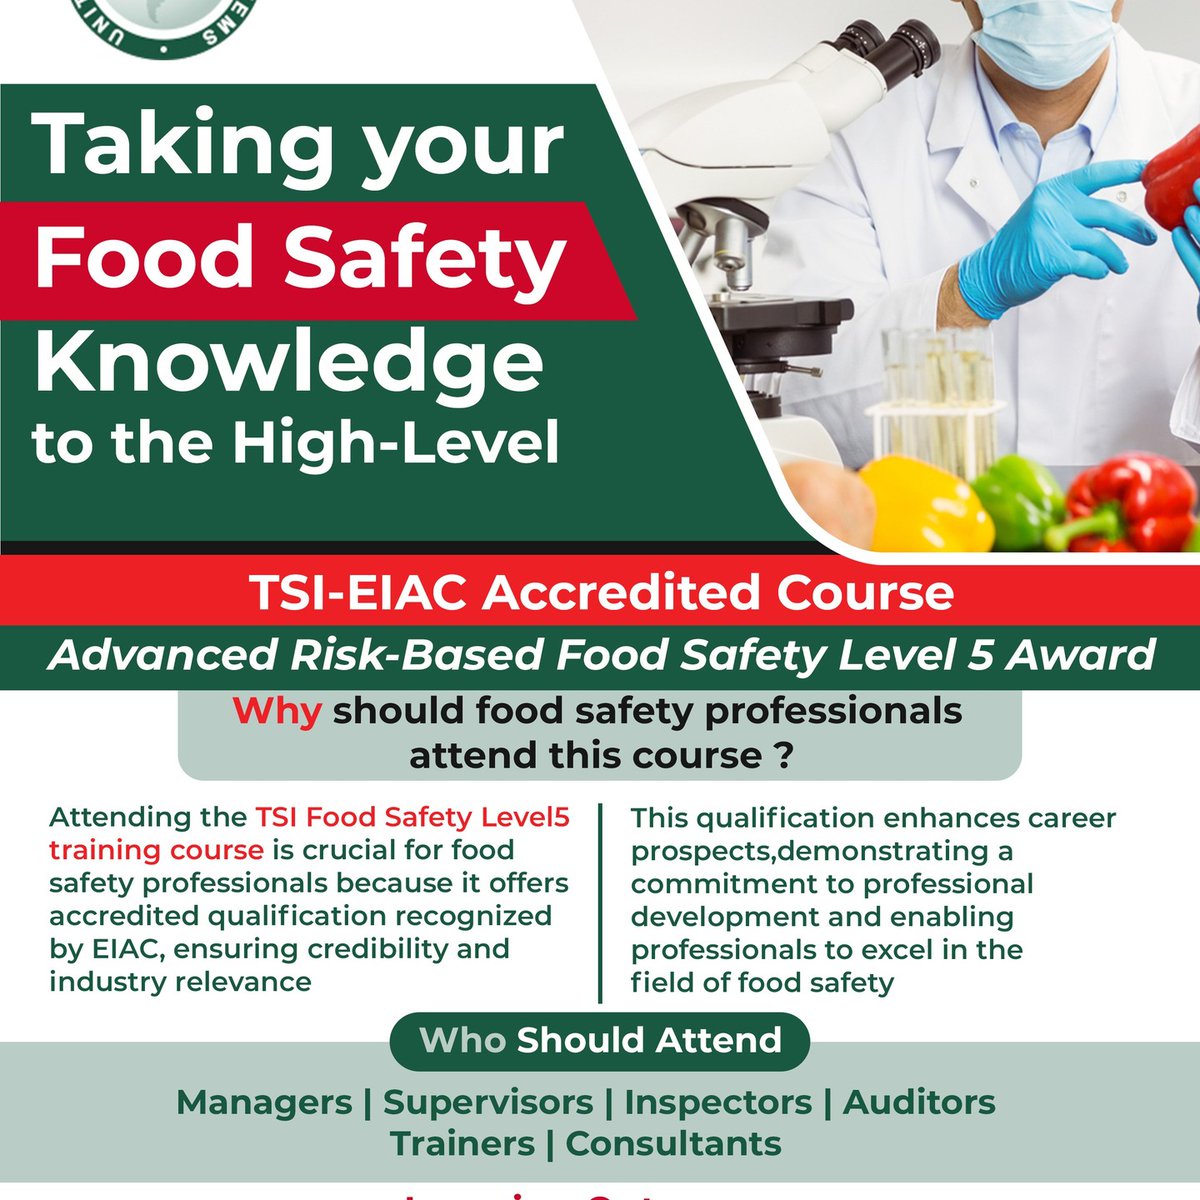 Level up your food safety expertise! 🍽
Enroll to our TSI-EIAC accredited Advanced Risk-Based Food Safety Level 5 Award. Perfect for managers, supervisors, inspectors, auditors, trainers & consultants in the field.
Contact : +971 4 384 7500 / info@urs-me.com.

#FoodSafety #EAIC